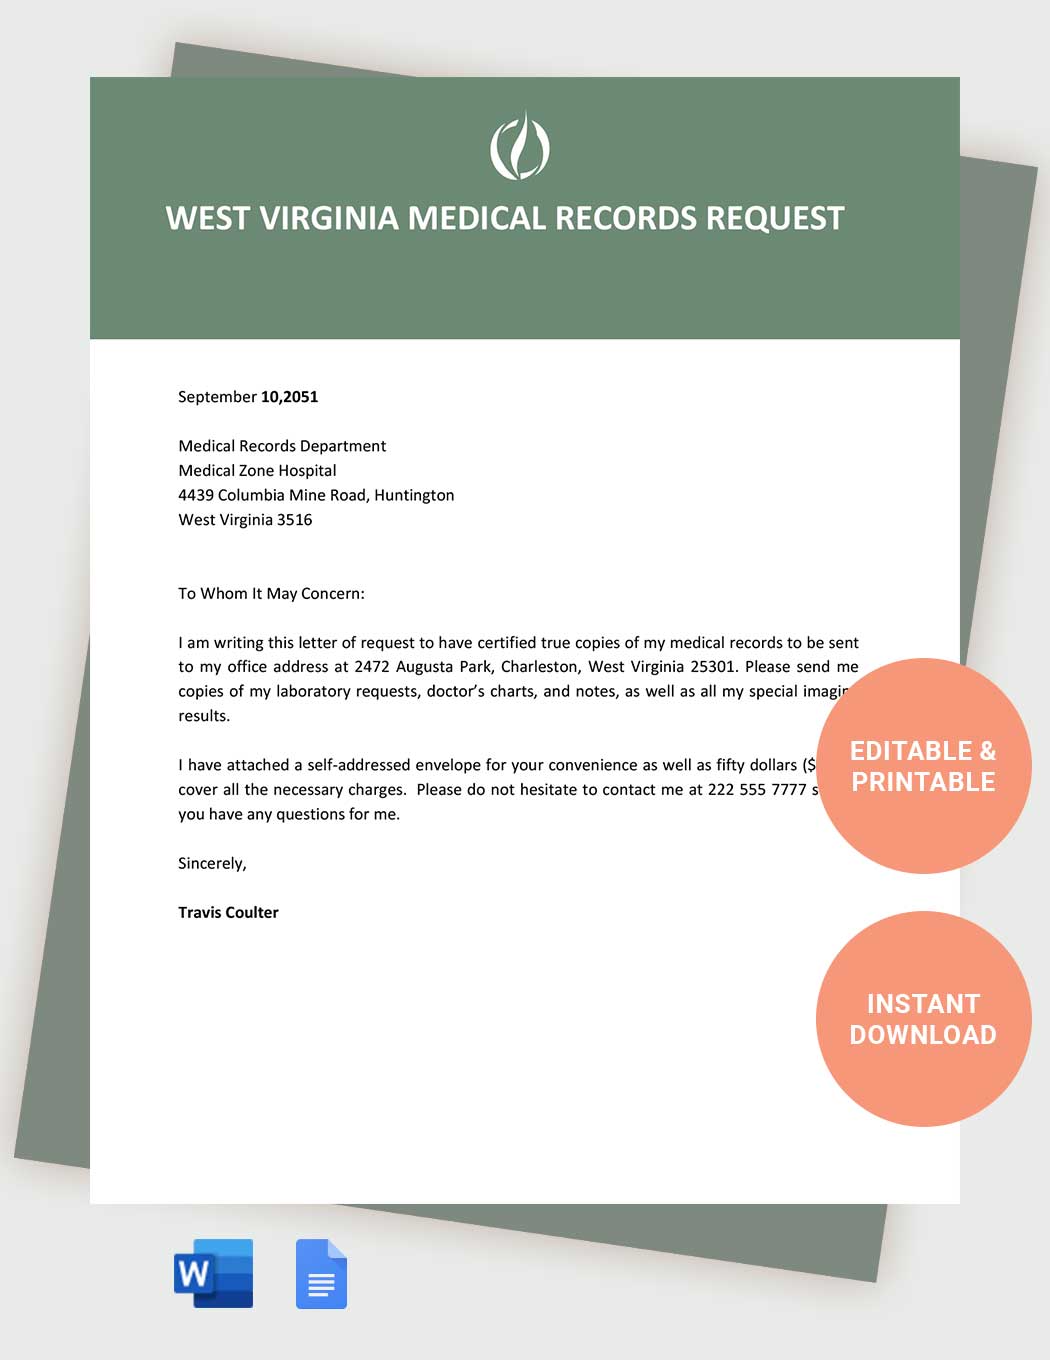 West Virginia Medical Records Request Template in Word, Google Docs